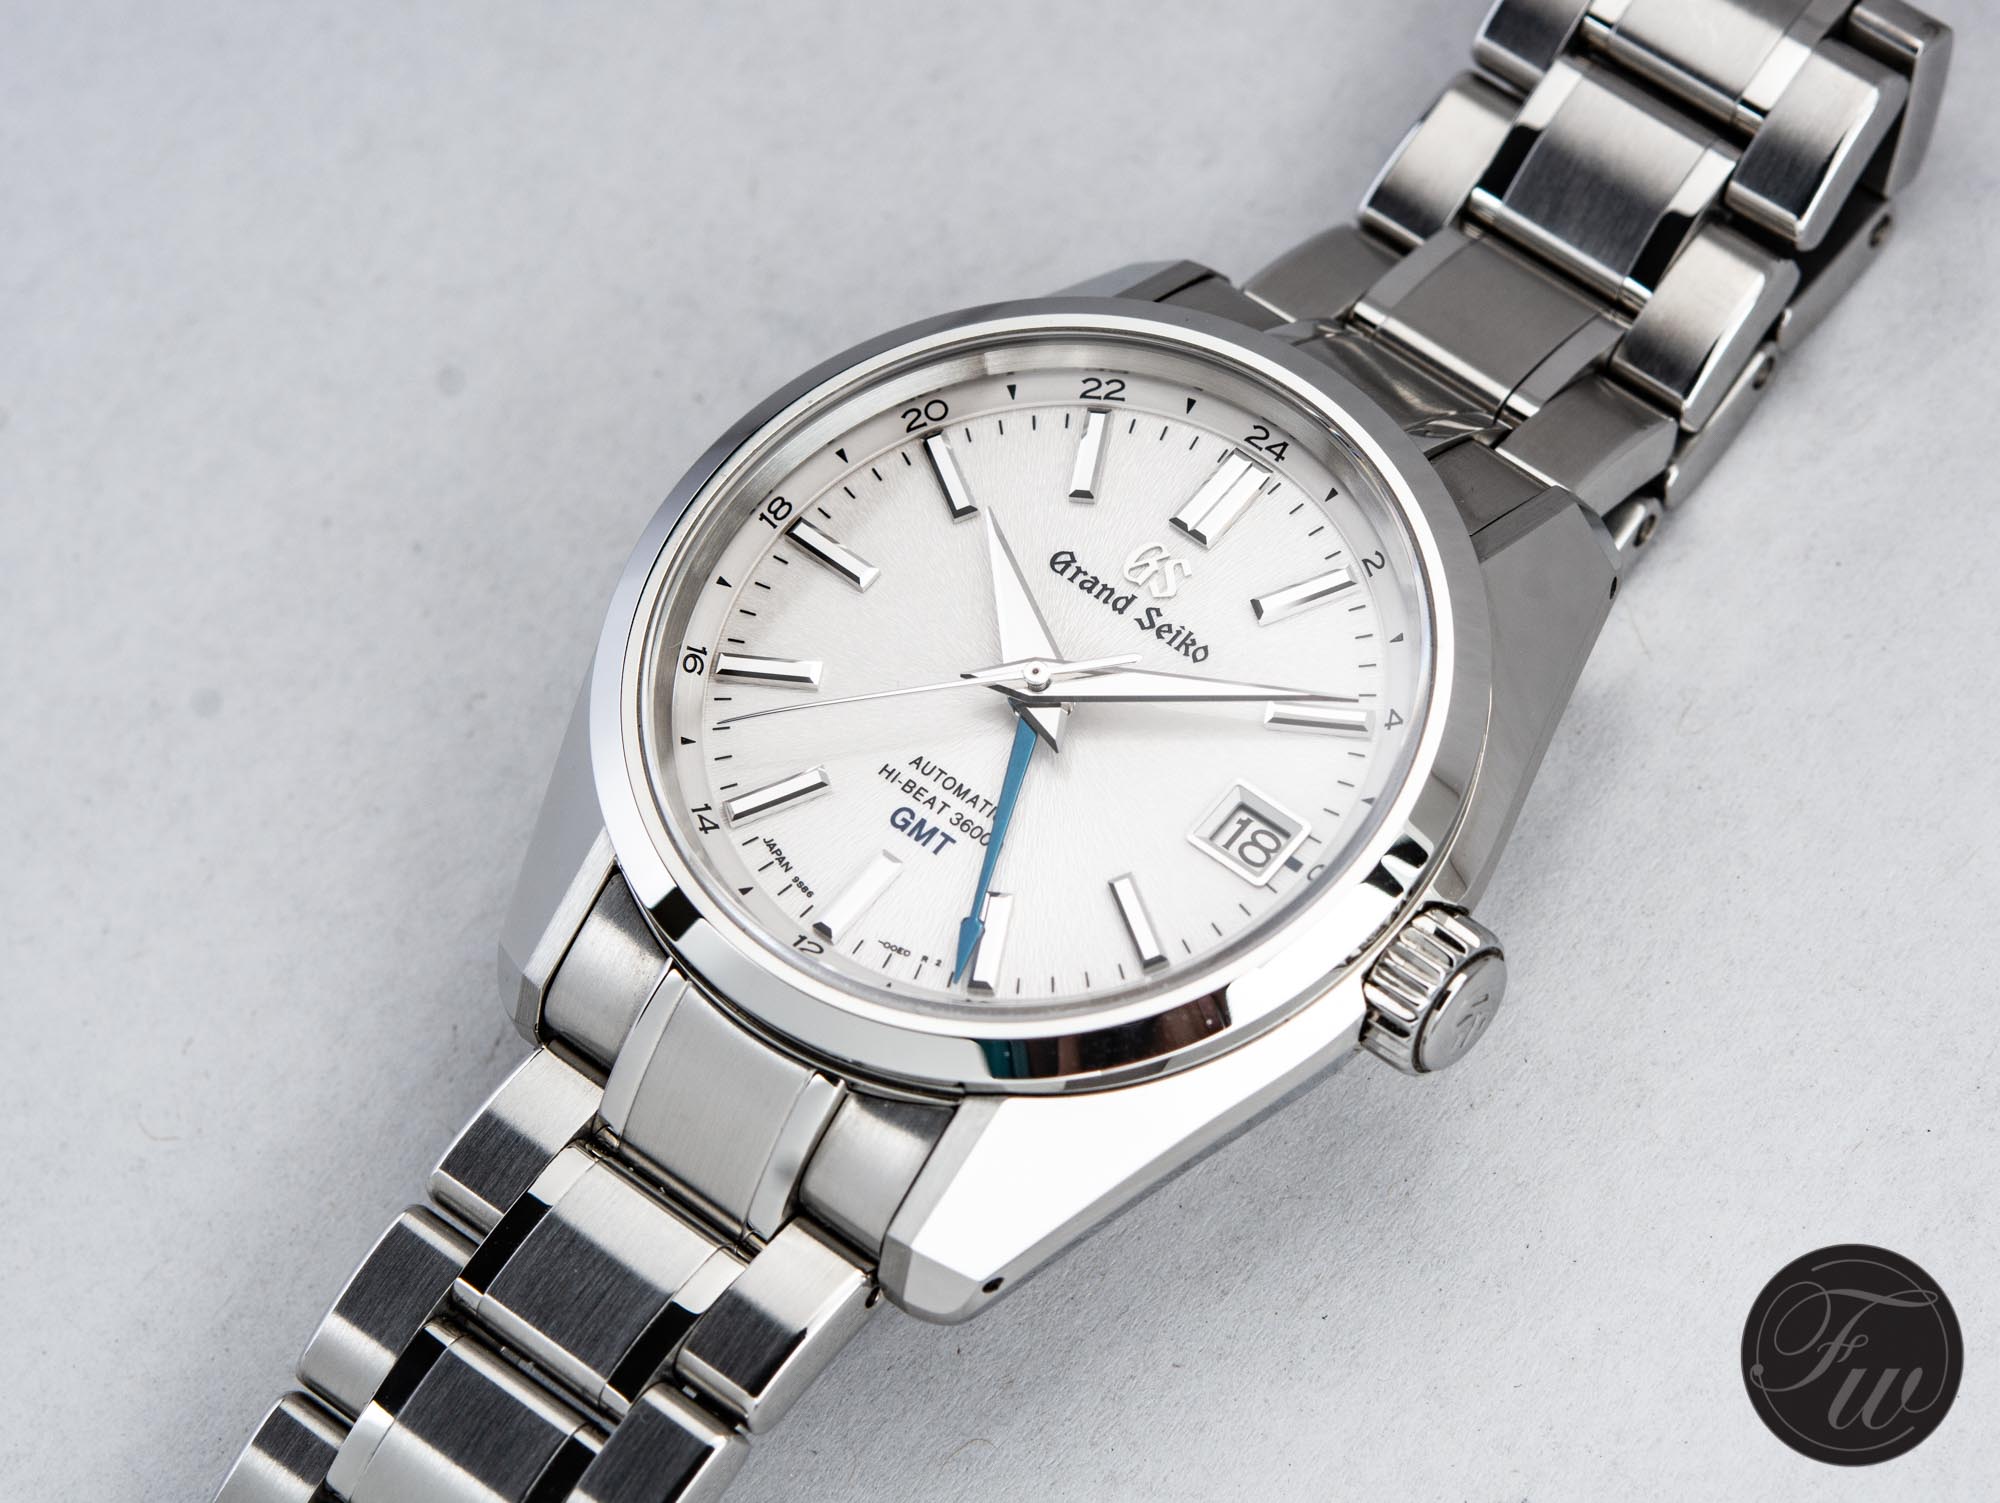 Why I Bought The Grand Seiko SBGJ201 (And Love It)